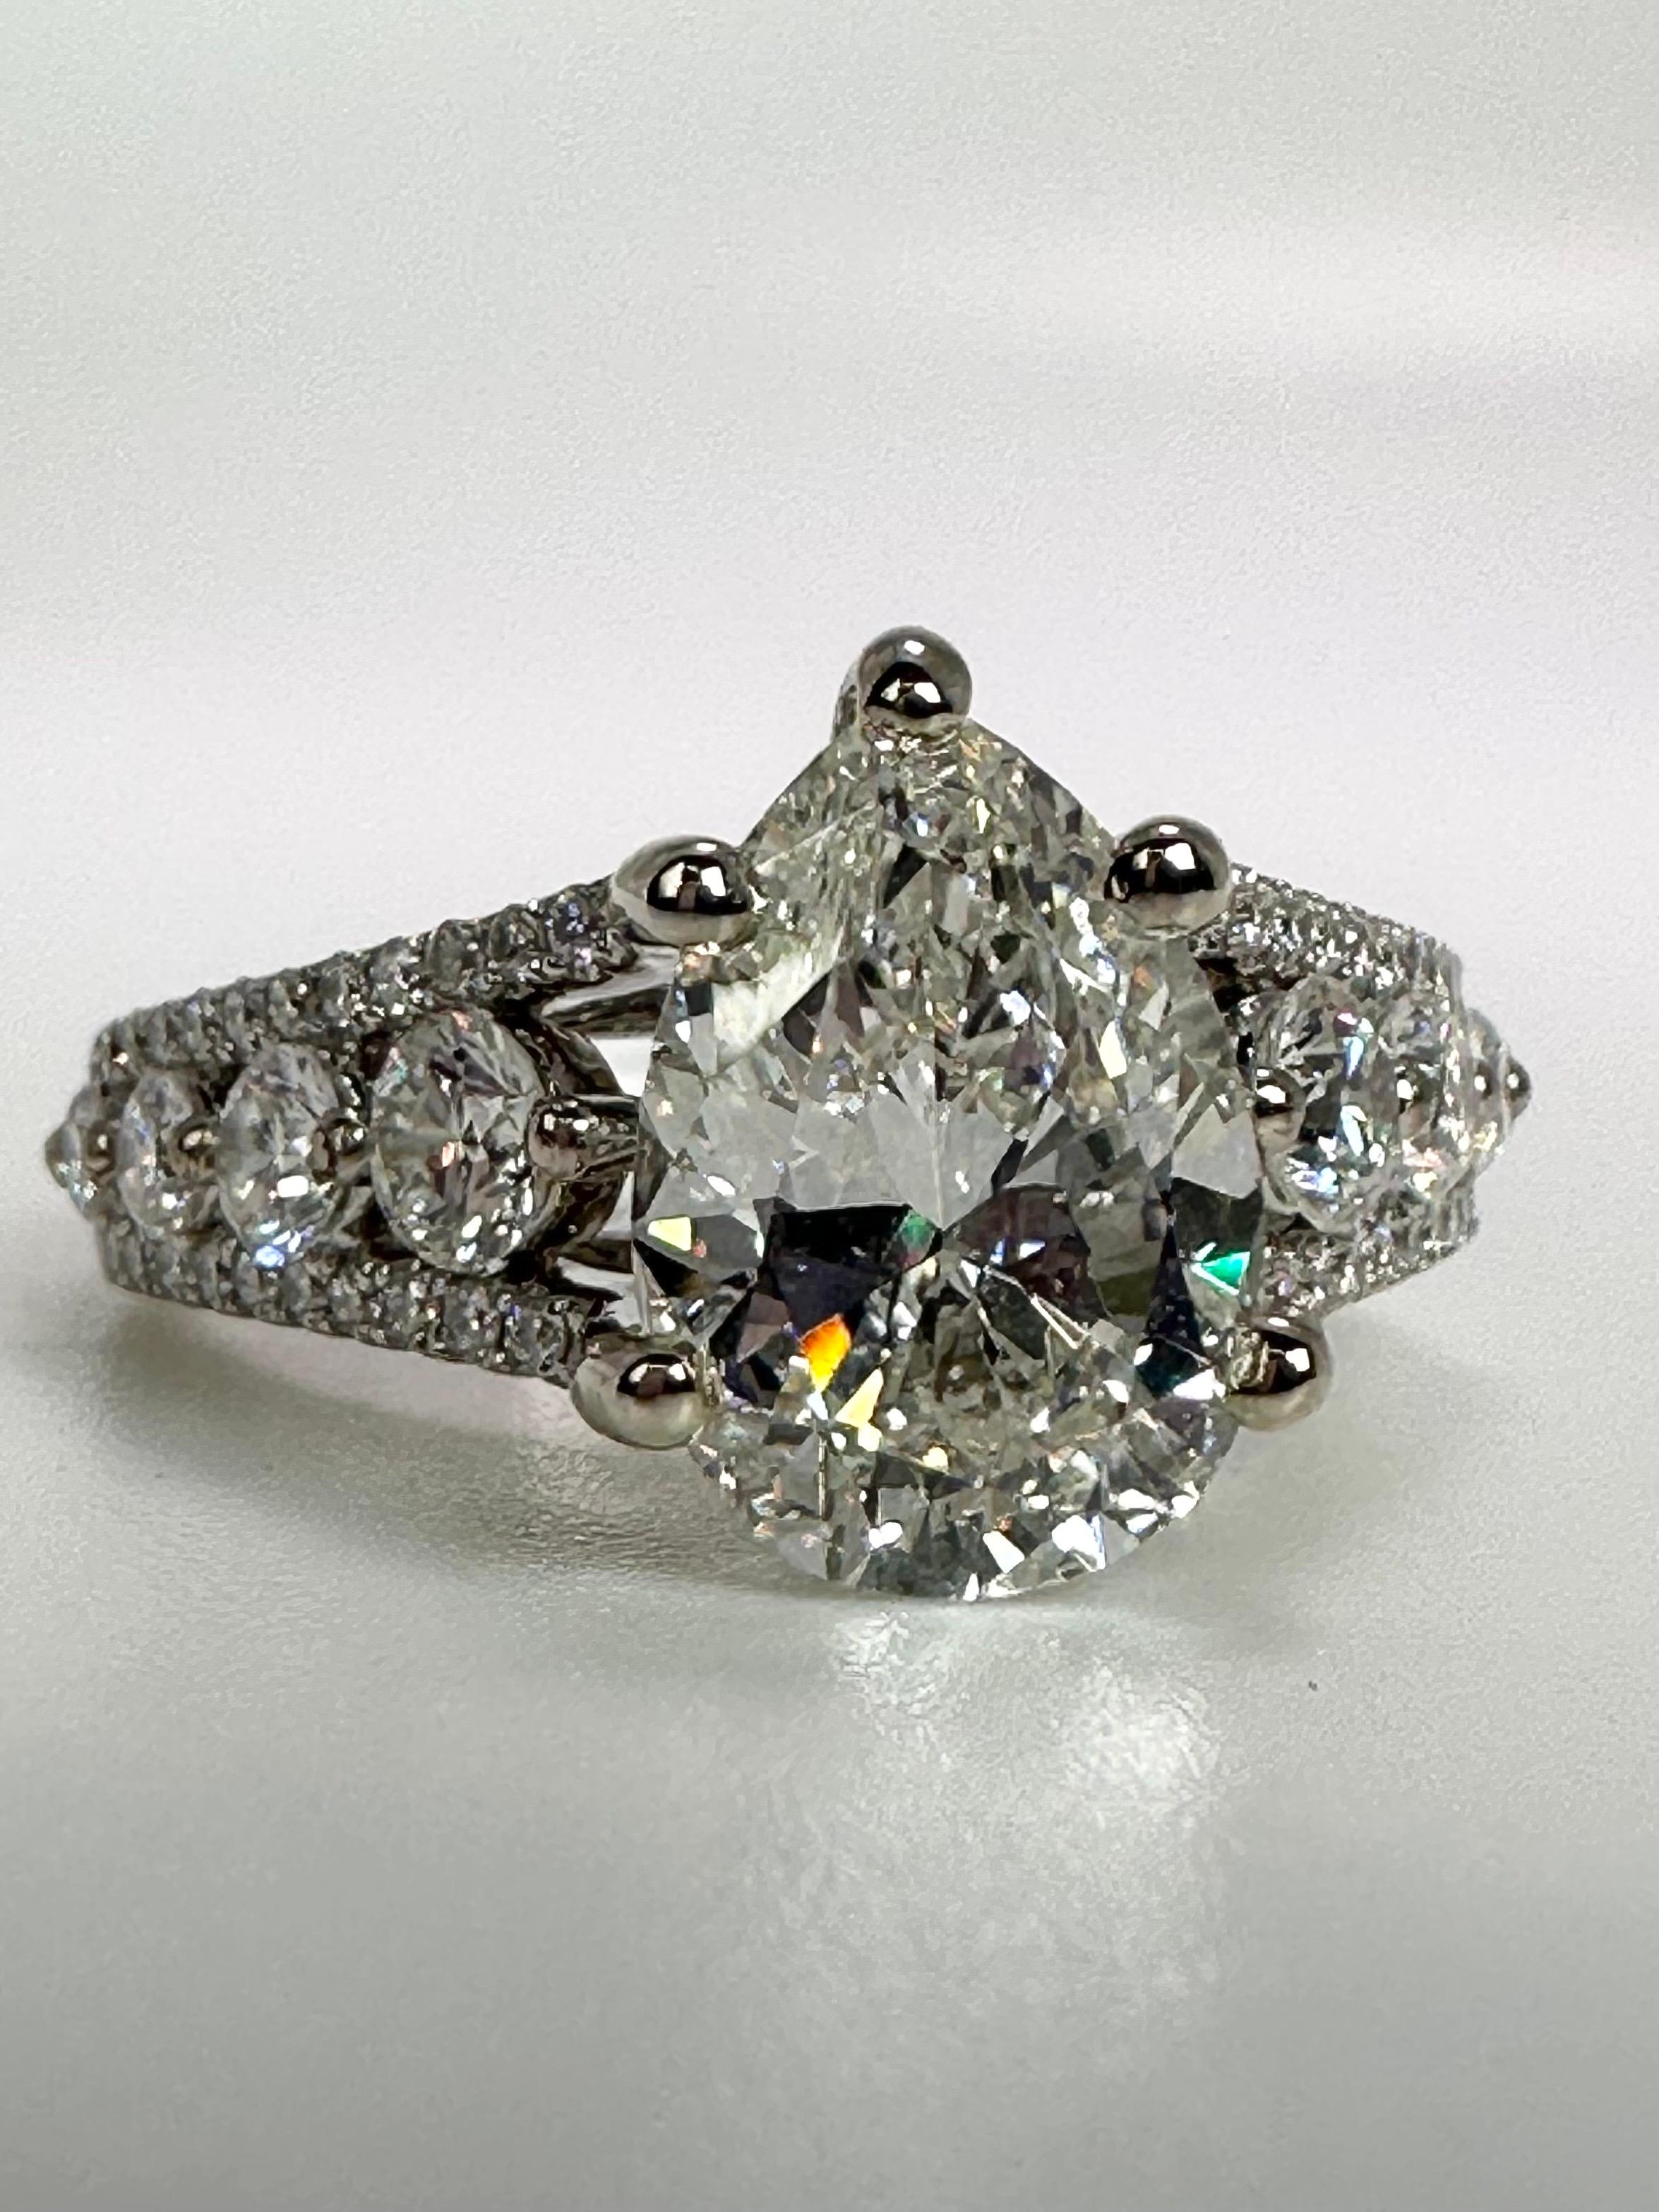 Stunning large diamond ring in platinum, well crafted in platinum with lots of small details! Certificate is available! The ring is made with quality in mind!

WHAT YOU GET AT STAMPAR JEWELERS:
Stampar Jewelers, located in the heart of Jupiter,